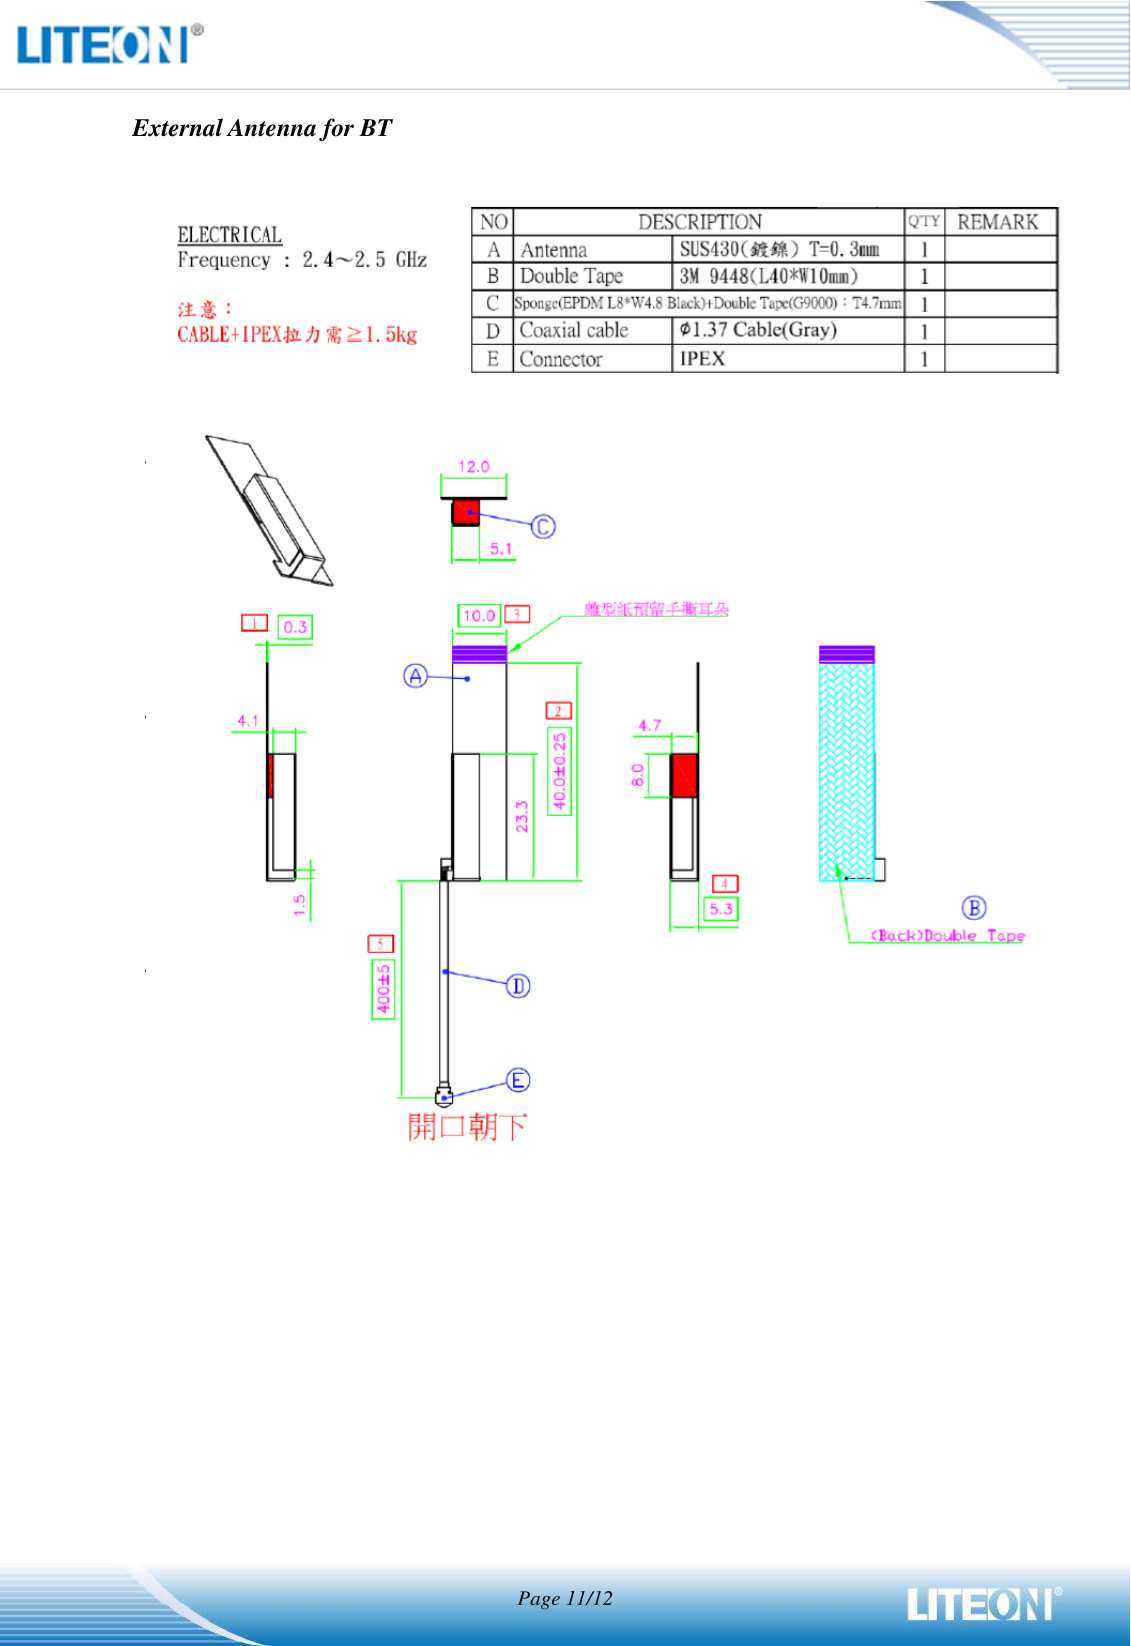  Page 11/12   External Antenna for BT        